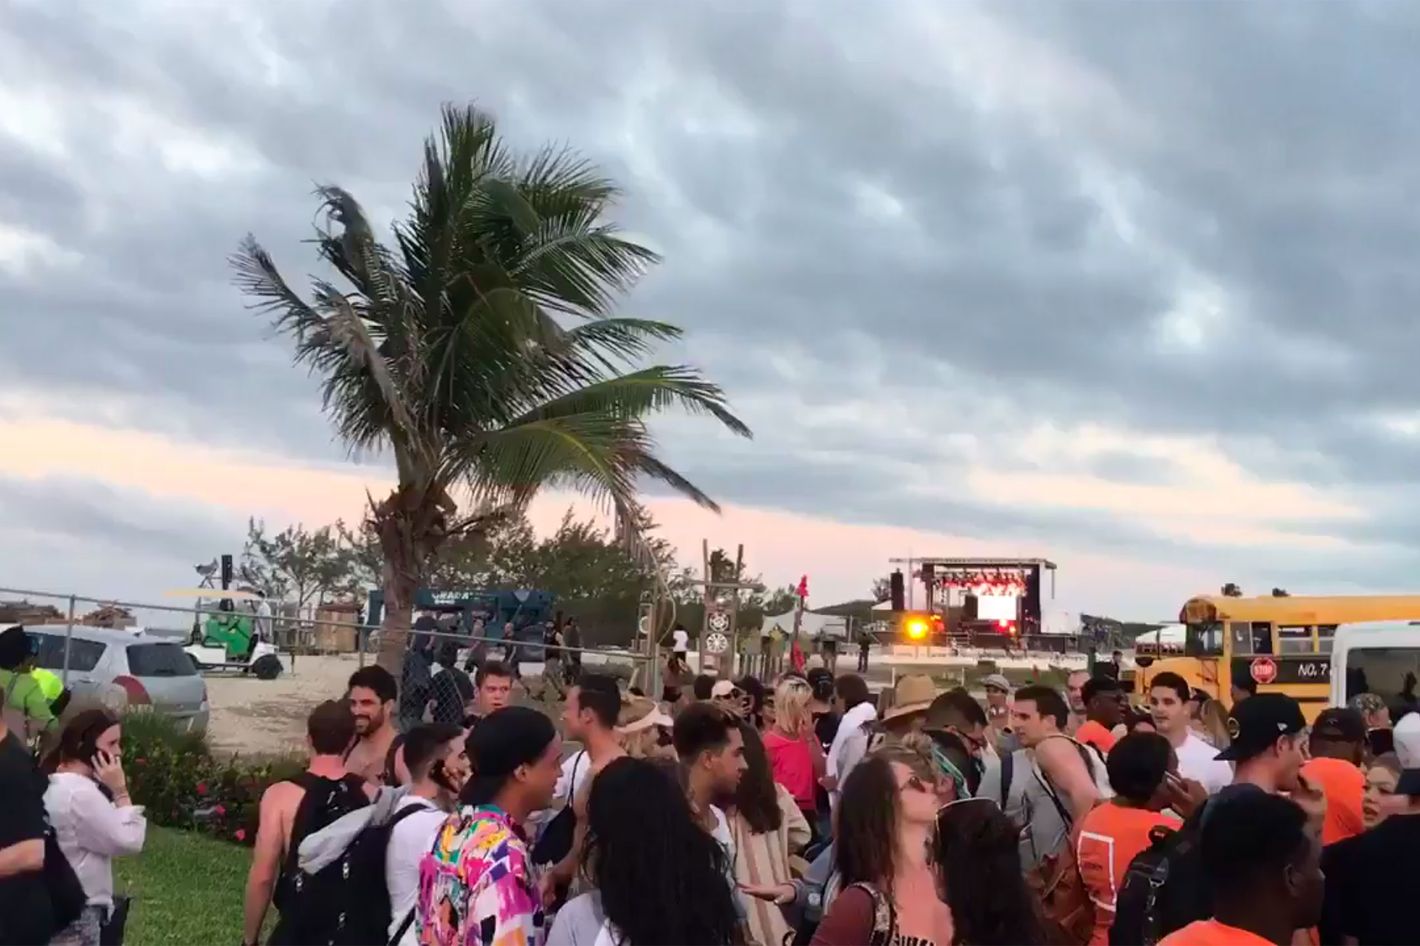 Luxury Fyre Festival Postponed Amid Reports of 'Mass Chaos'